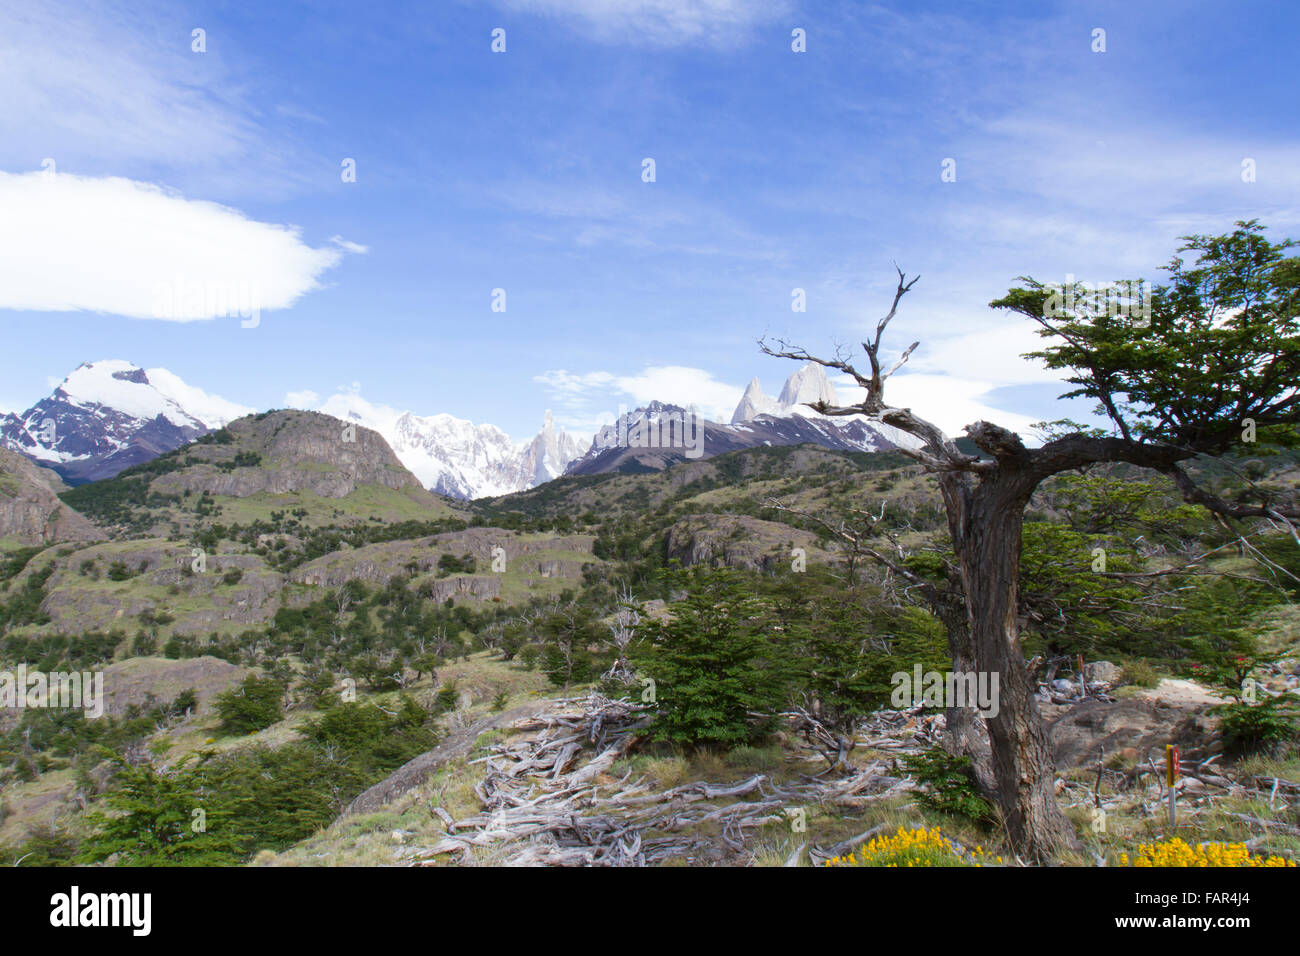 Spring flowers in landscape of Los Glaciares National Park, Patagonia, Argentina. Stock Photo